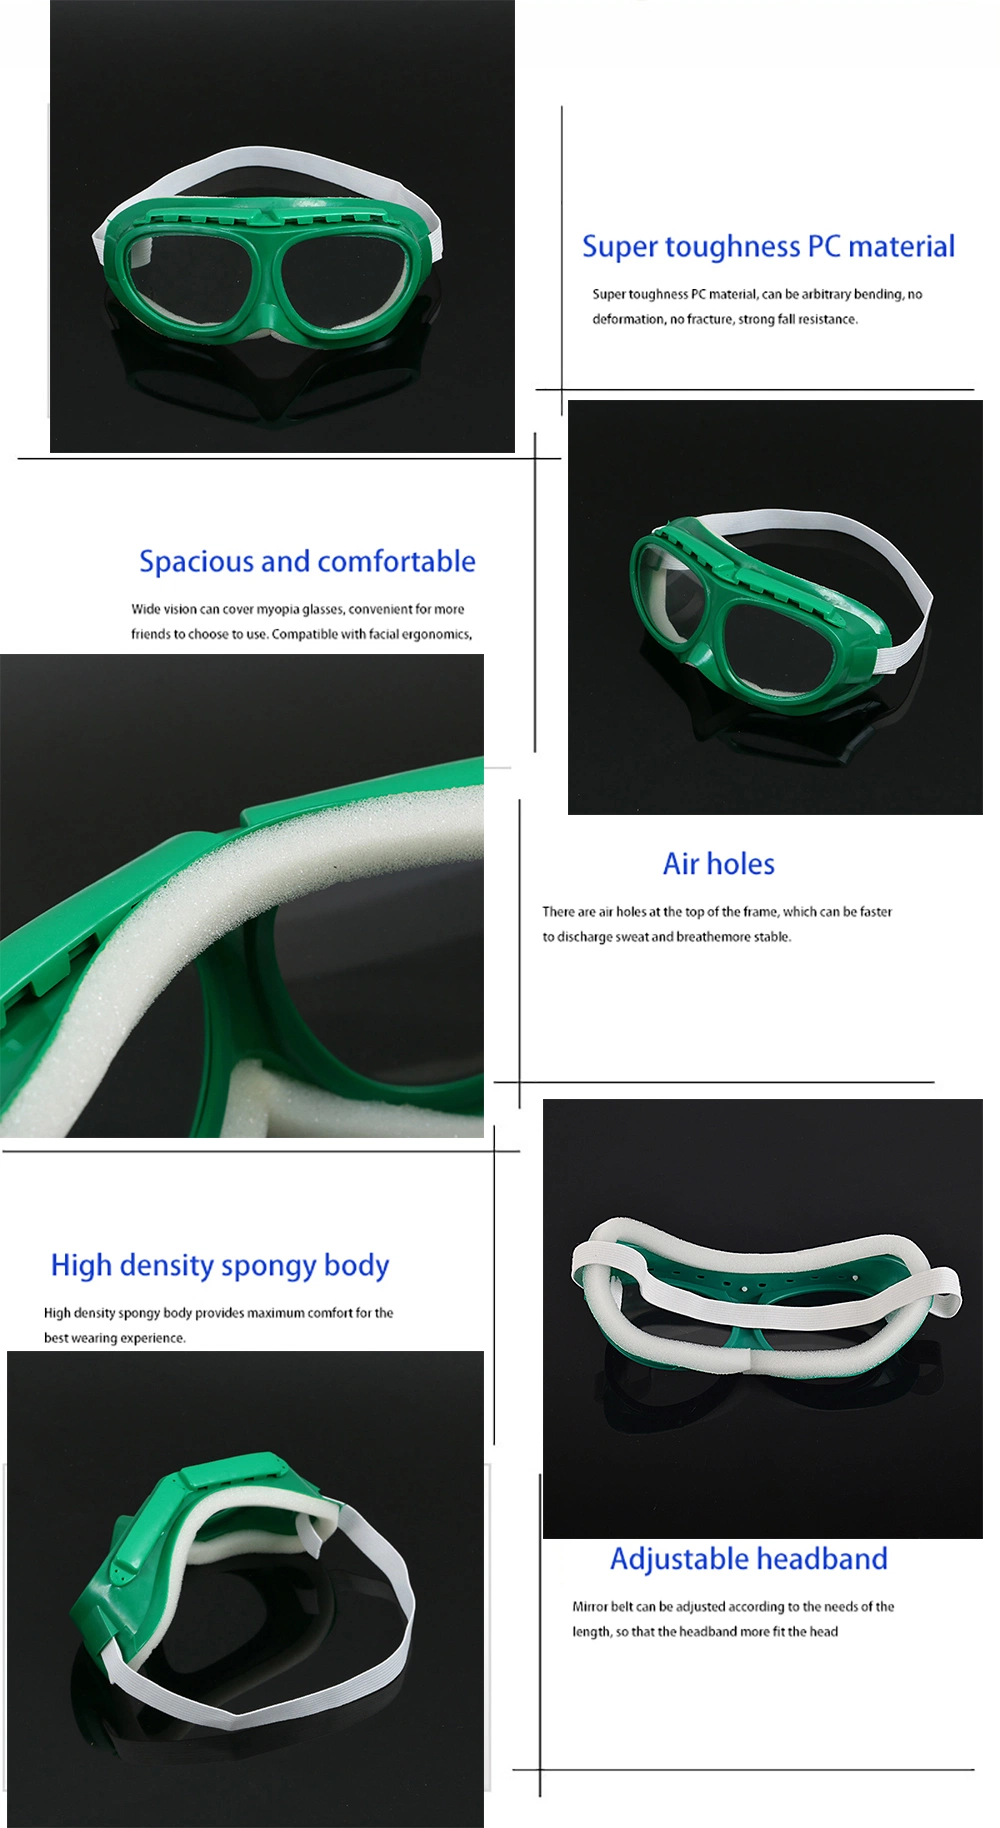 in Stock CE Certificate Resistant Eye Protection Protective Glasses Splash-Proof Anti-Droplet Safety Glasses